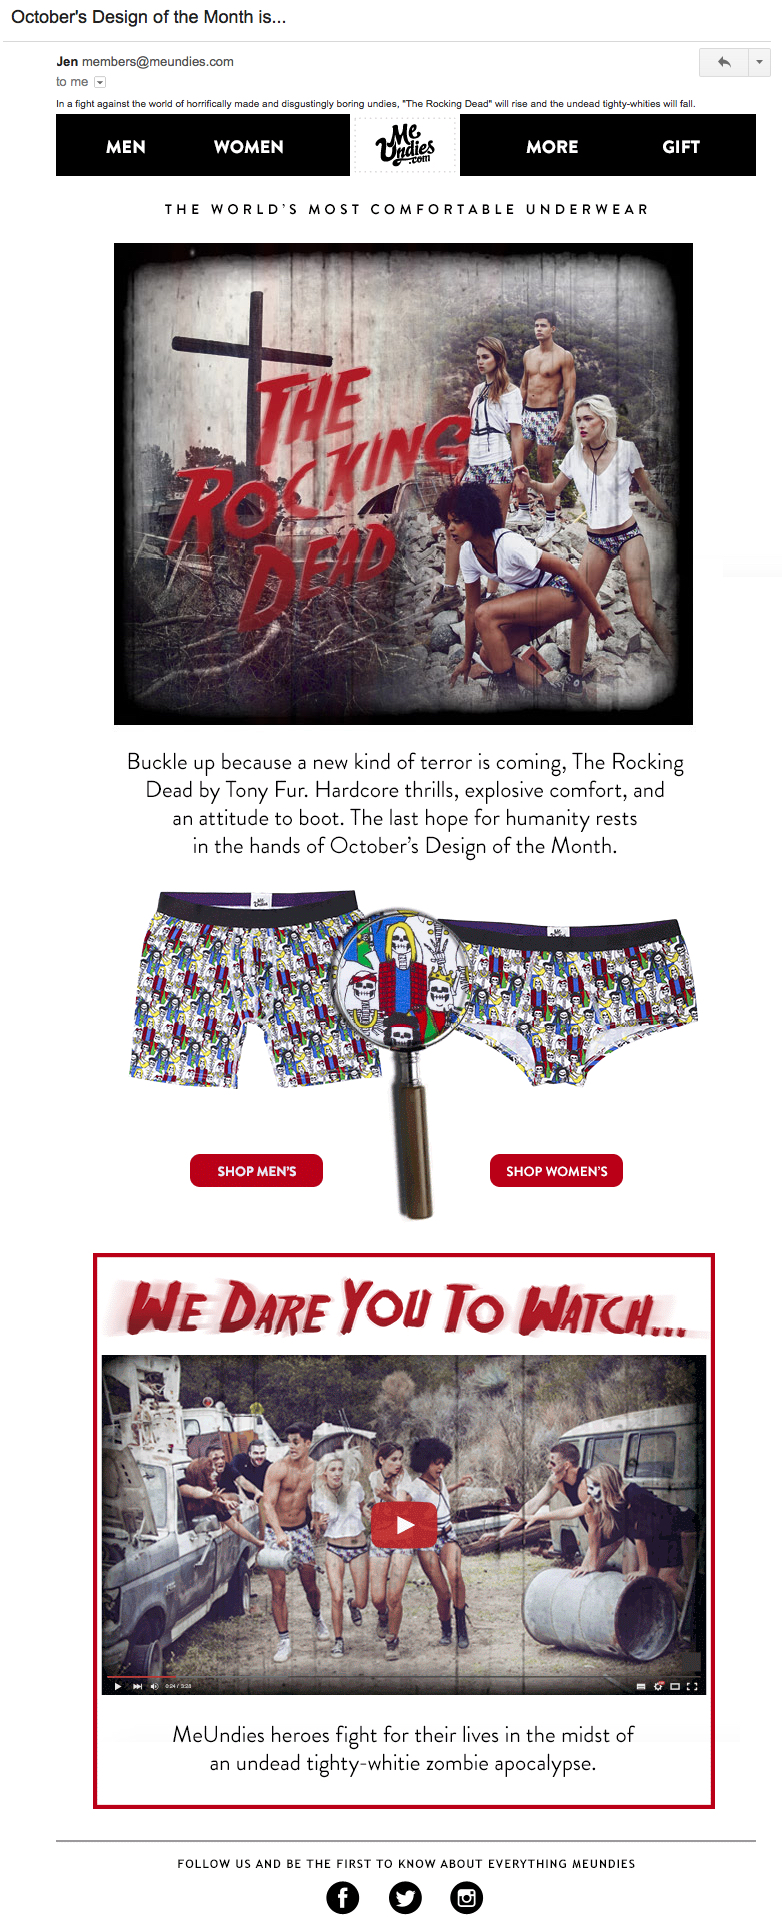 The MeUndies Lifecycle: Great Emails Before and After the Sale